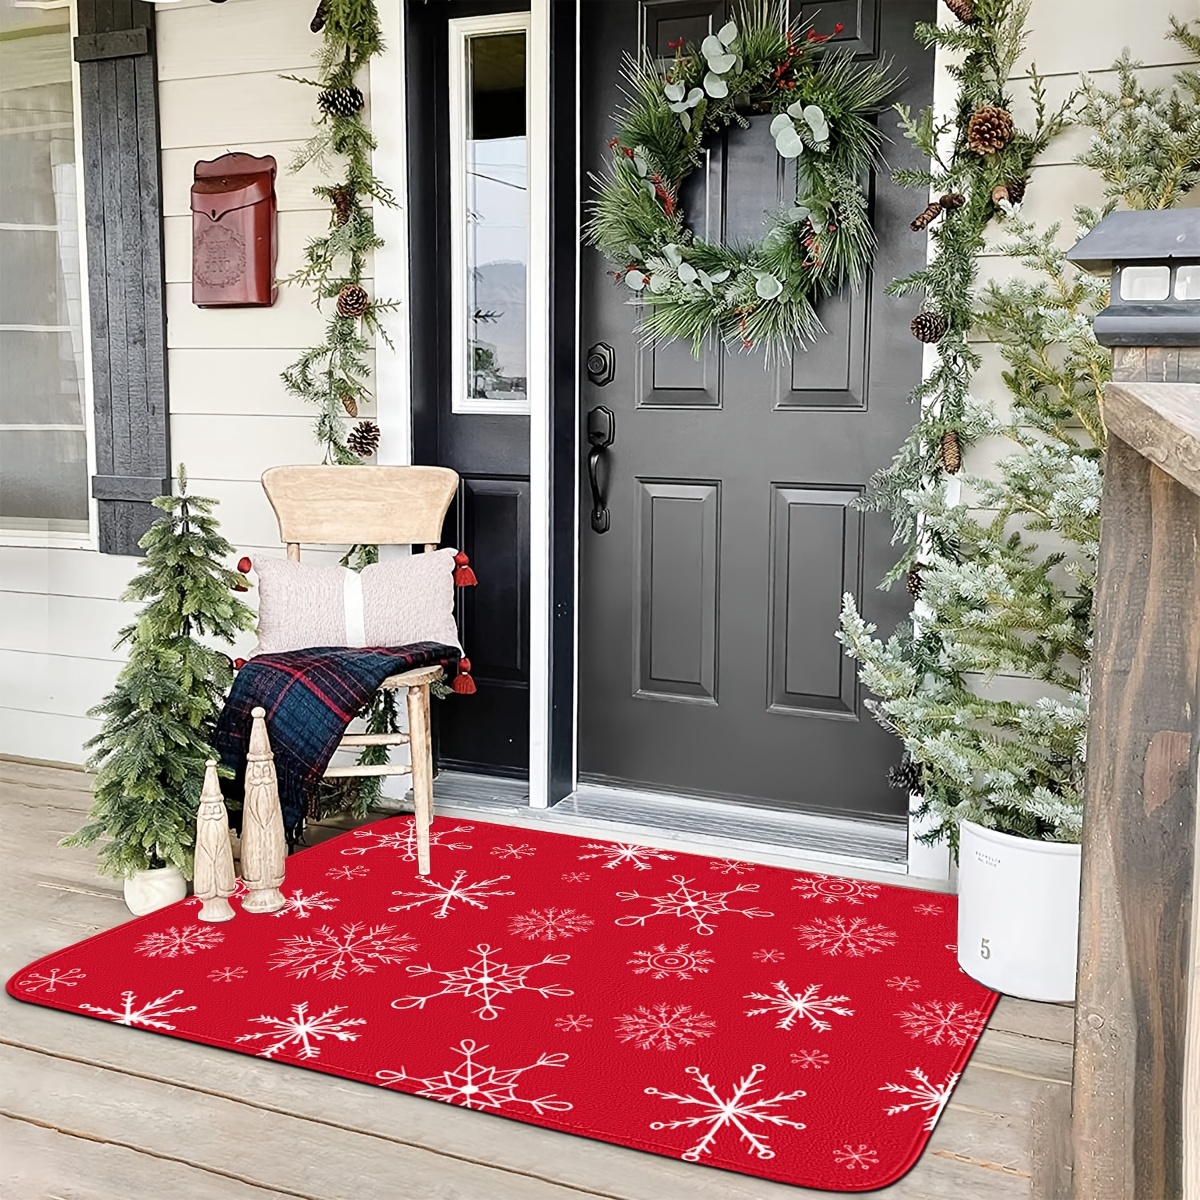 Door Mat Floor Rugs, Entrance Mat for Kitchen, Entry Mat for Outdoor Home  Porch Gift Gray 45x70cm Gray 50x80cm